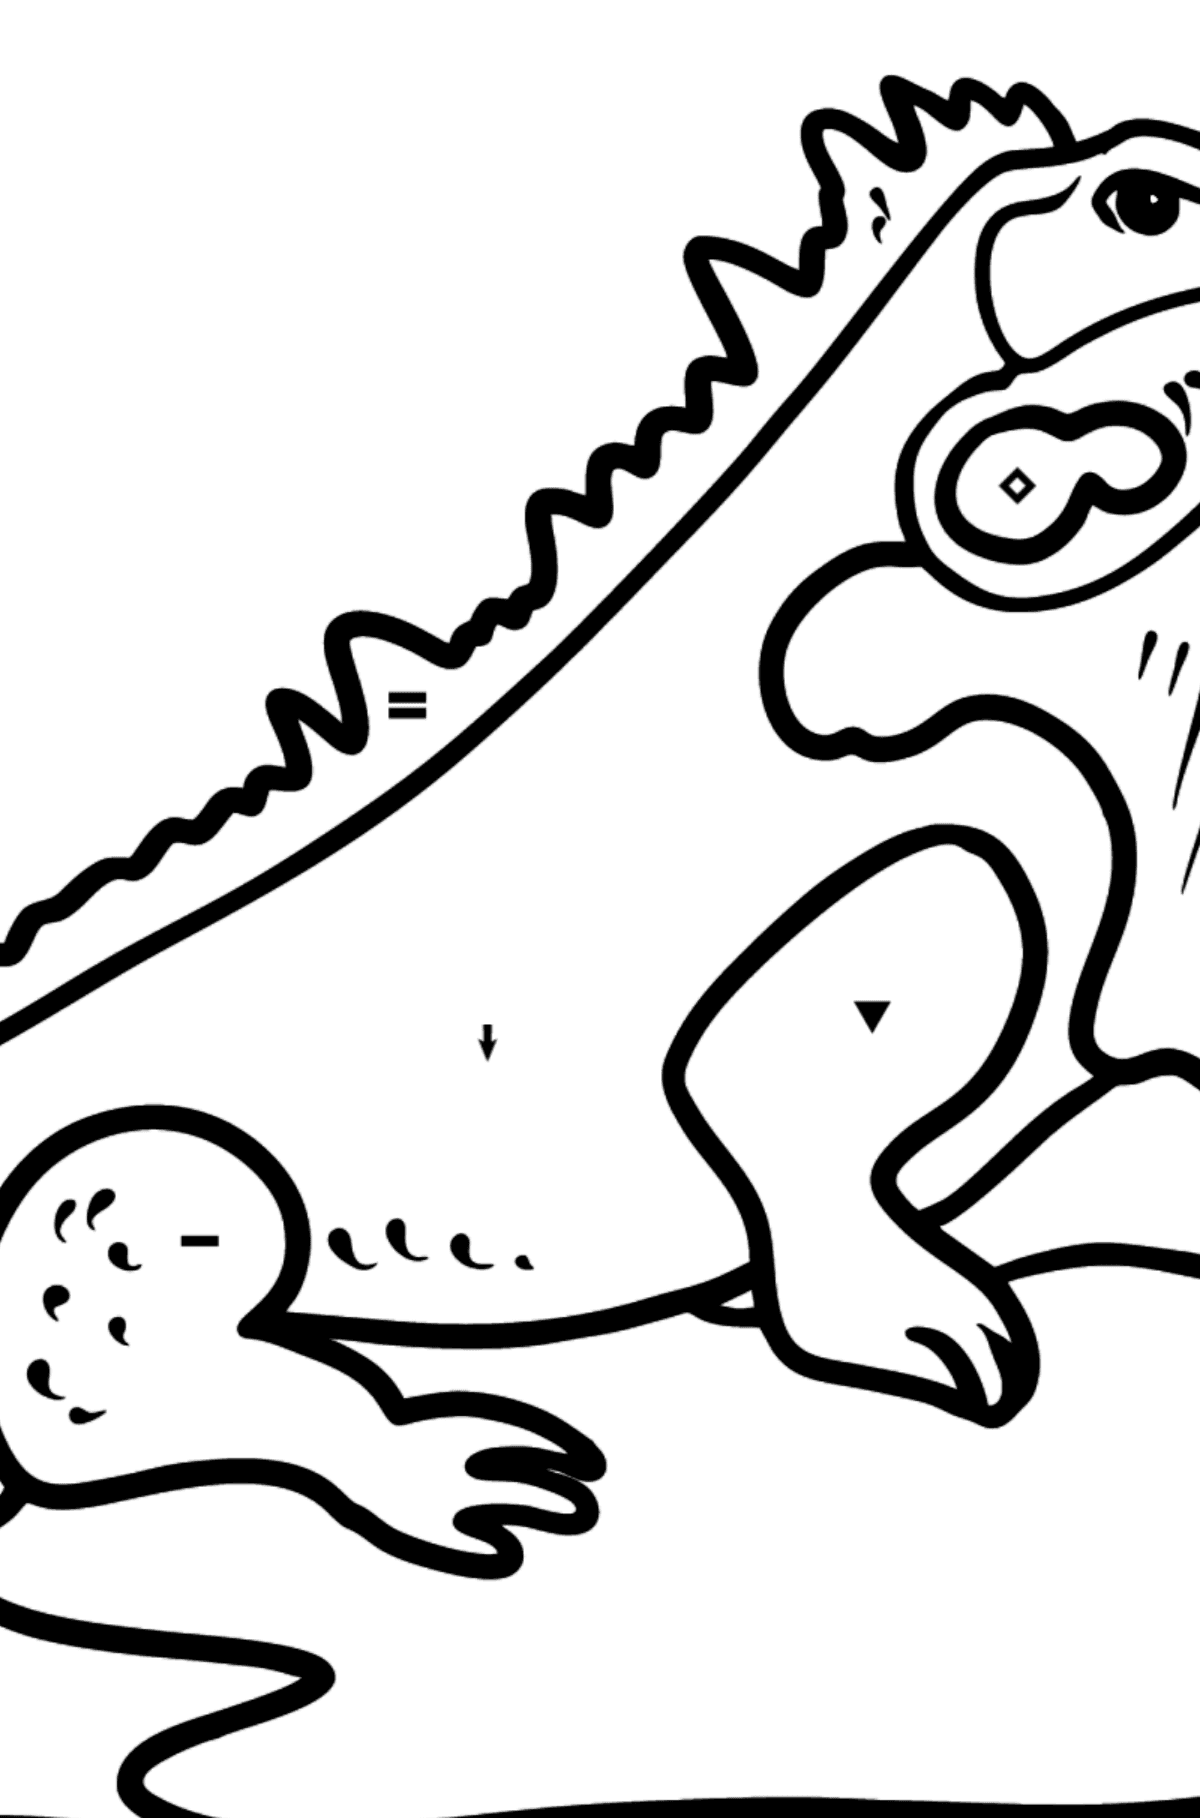 Spanish Letter I coloring pages - IGUANA - Coloring by Symbols for Kids